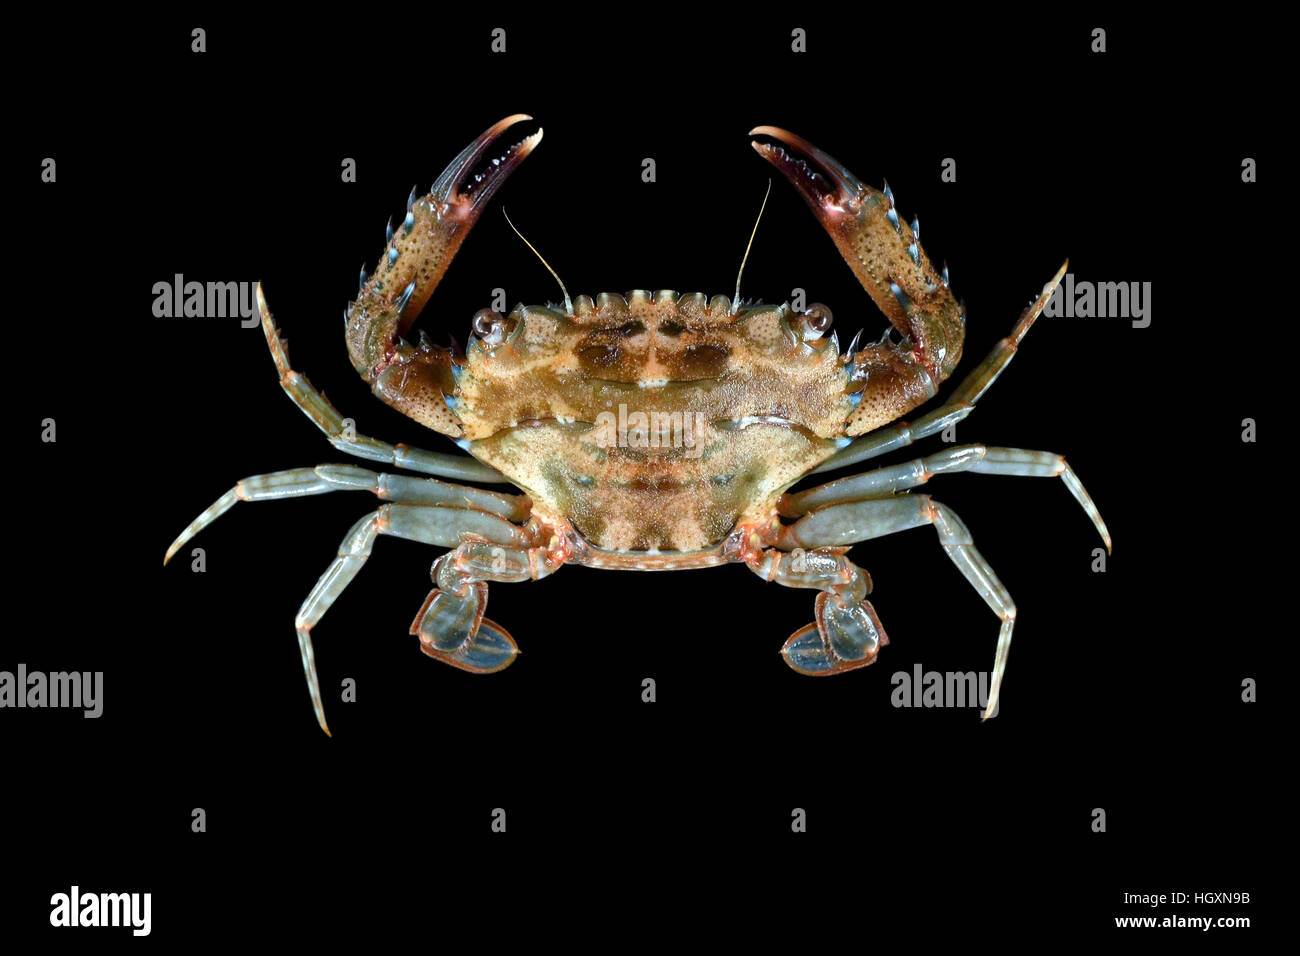 Shore portunid crab from Indonesia Stock Photo